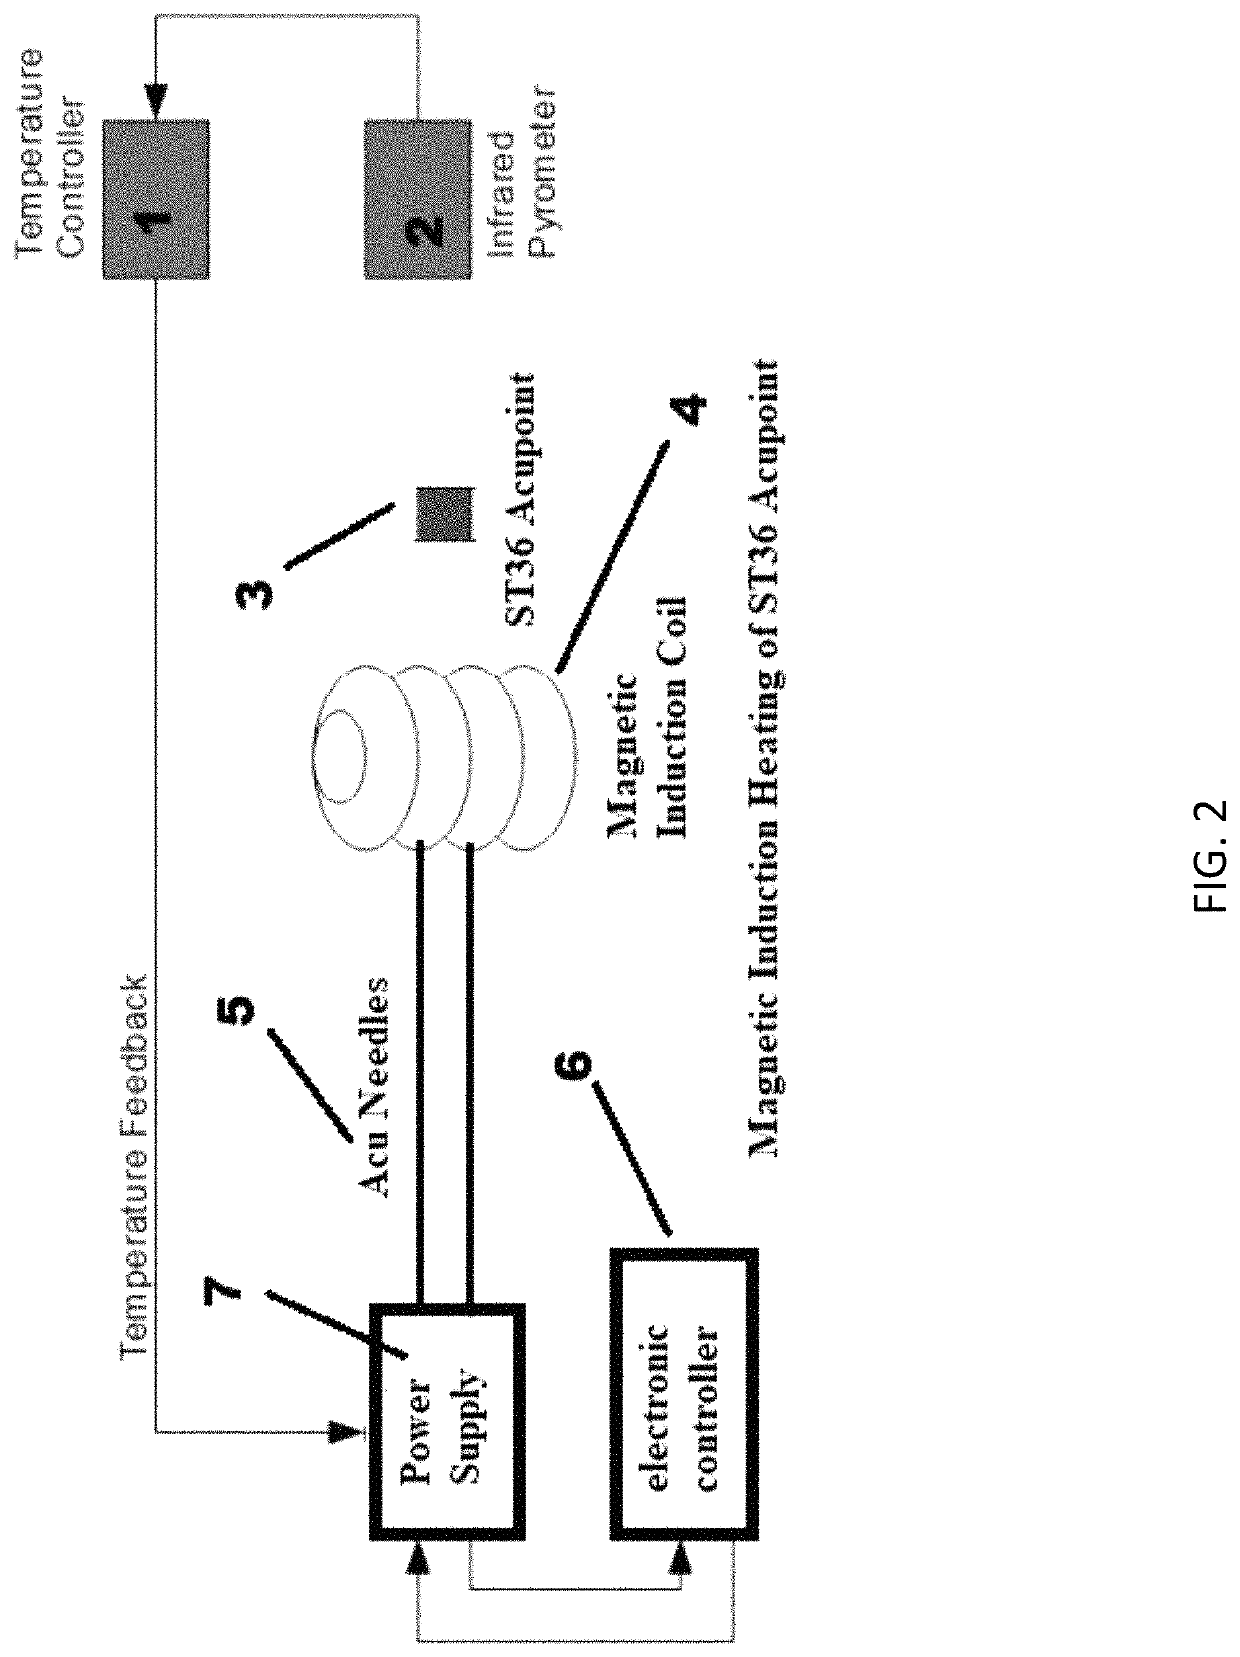 System for noninvasive pulsed magnetic induction heating of acupoints for the neurorehabilitation of stroke and brain injury, and for the prevention and treatment of dementia, age-related cognitive decline, and depression